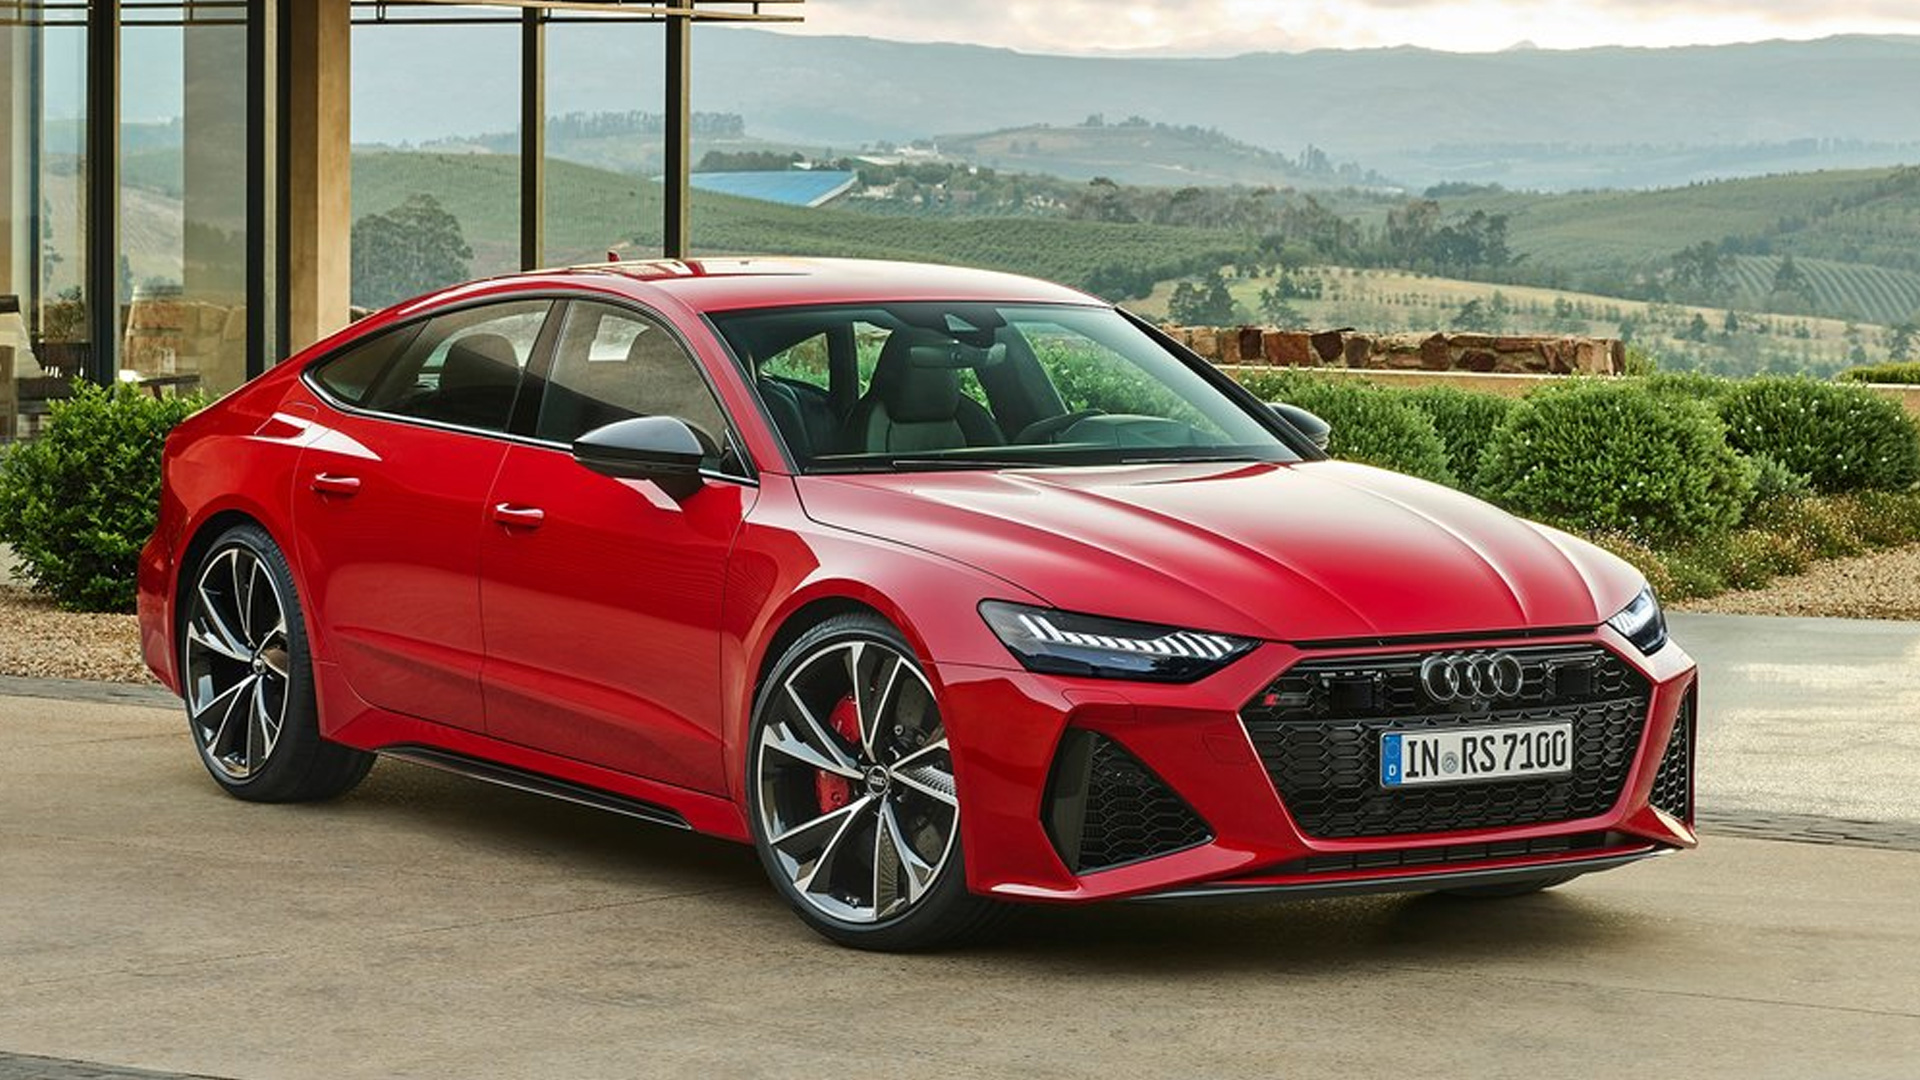 Audi RS 7 2020 Price, Mileage, Reviews, Specification, Gallery